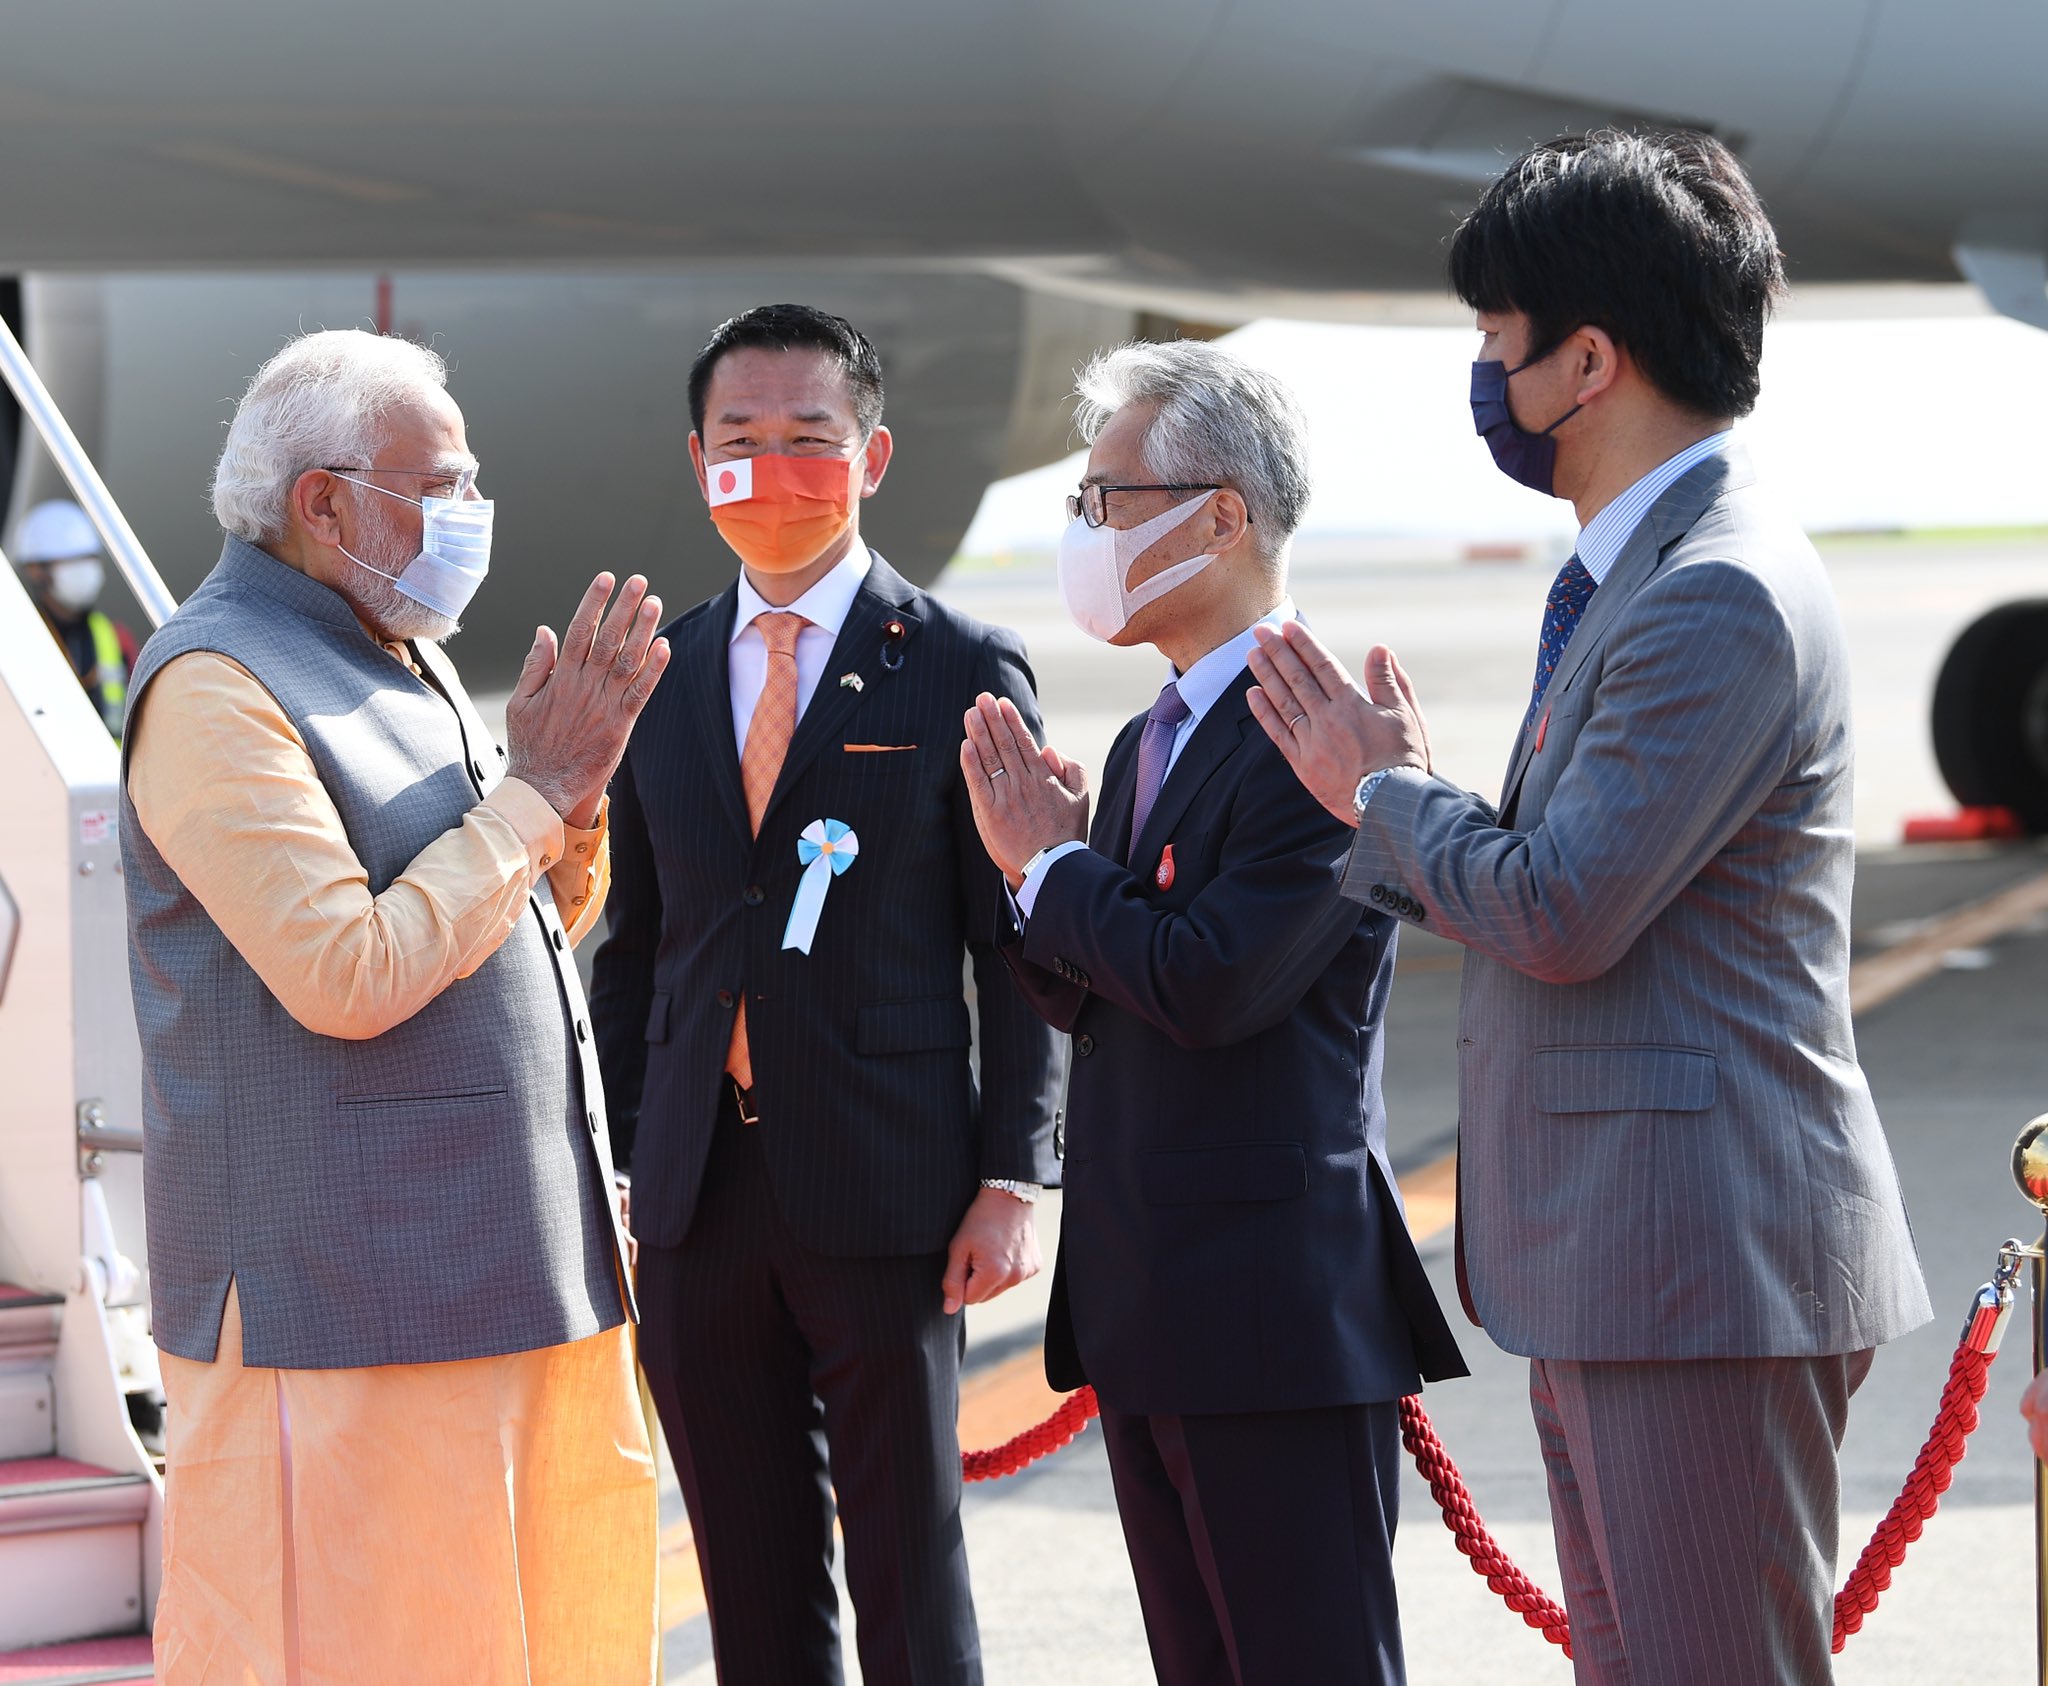 PM Modi arrives in Japan on two-day visit to attend Quad summit, bilaterals